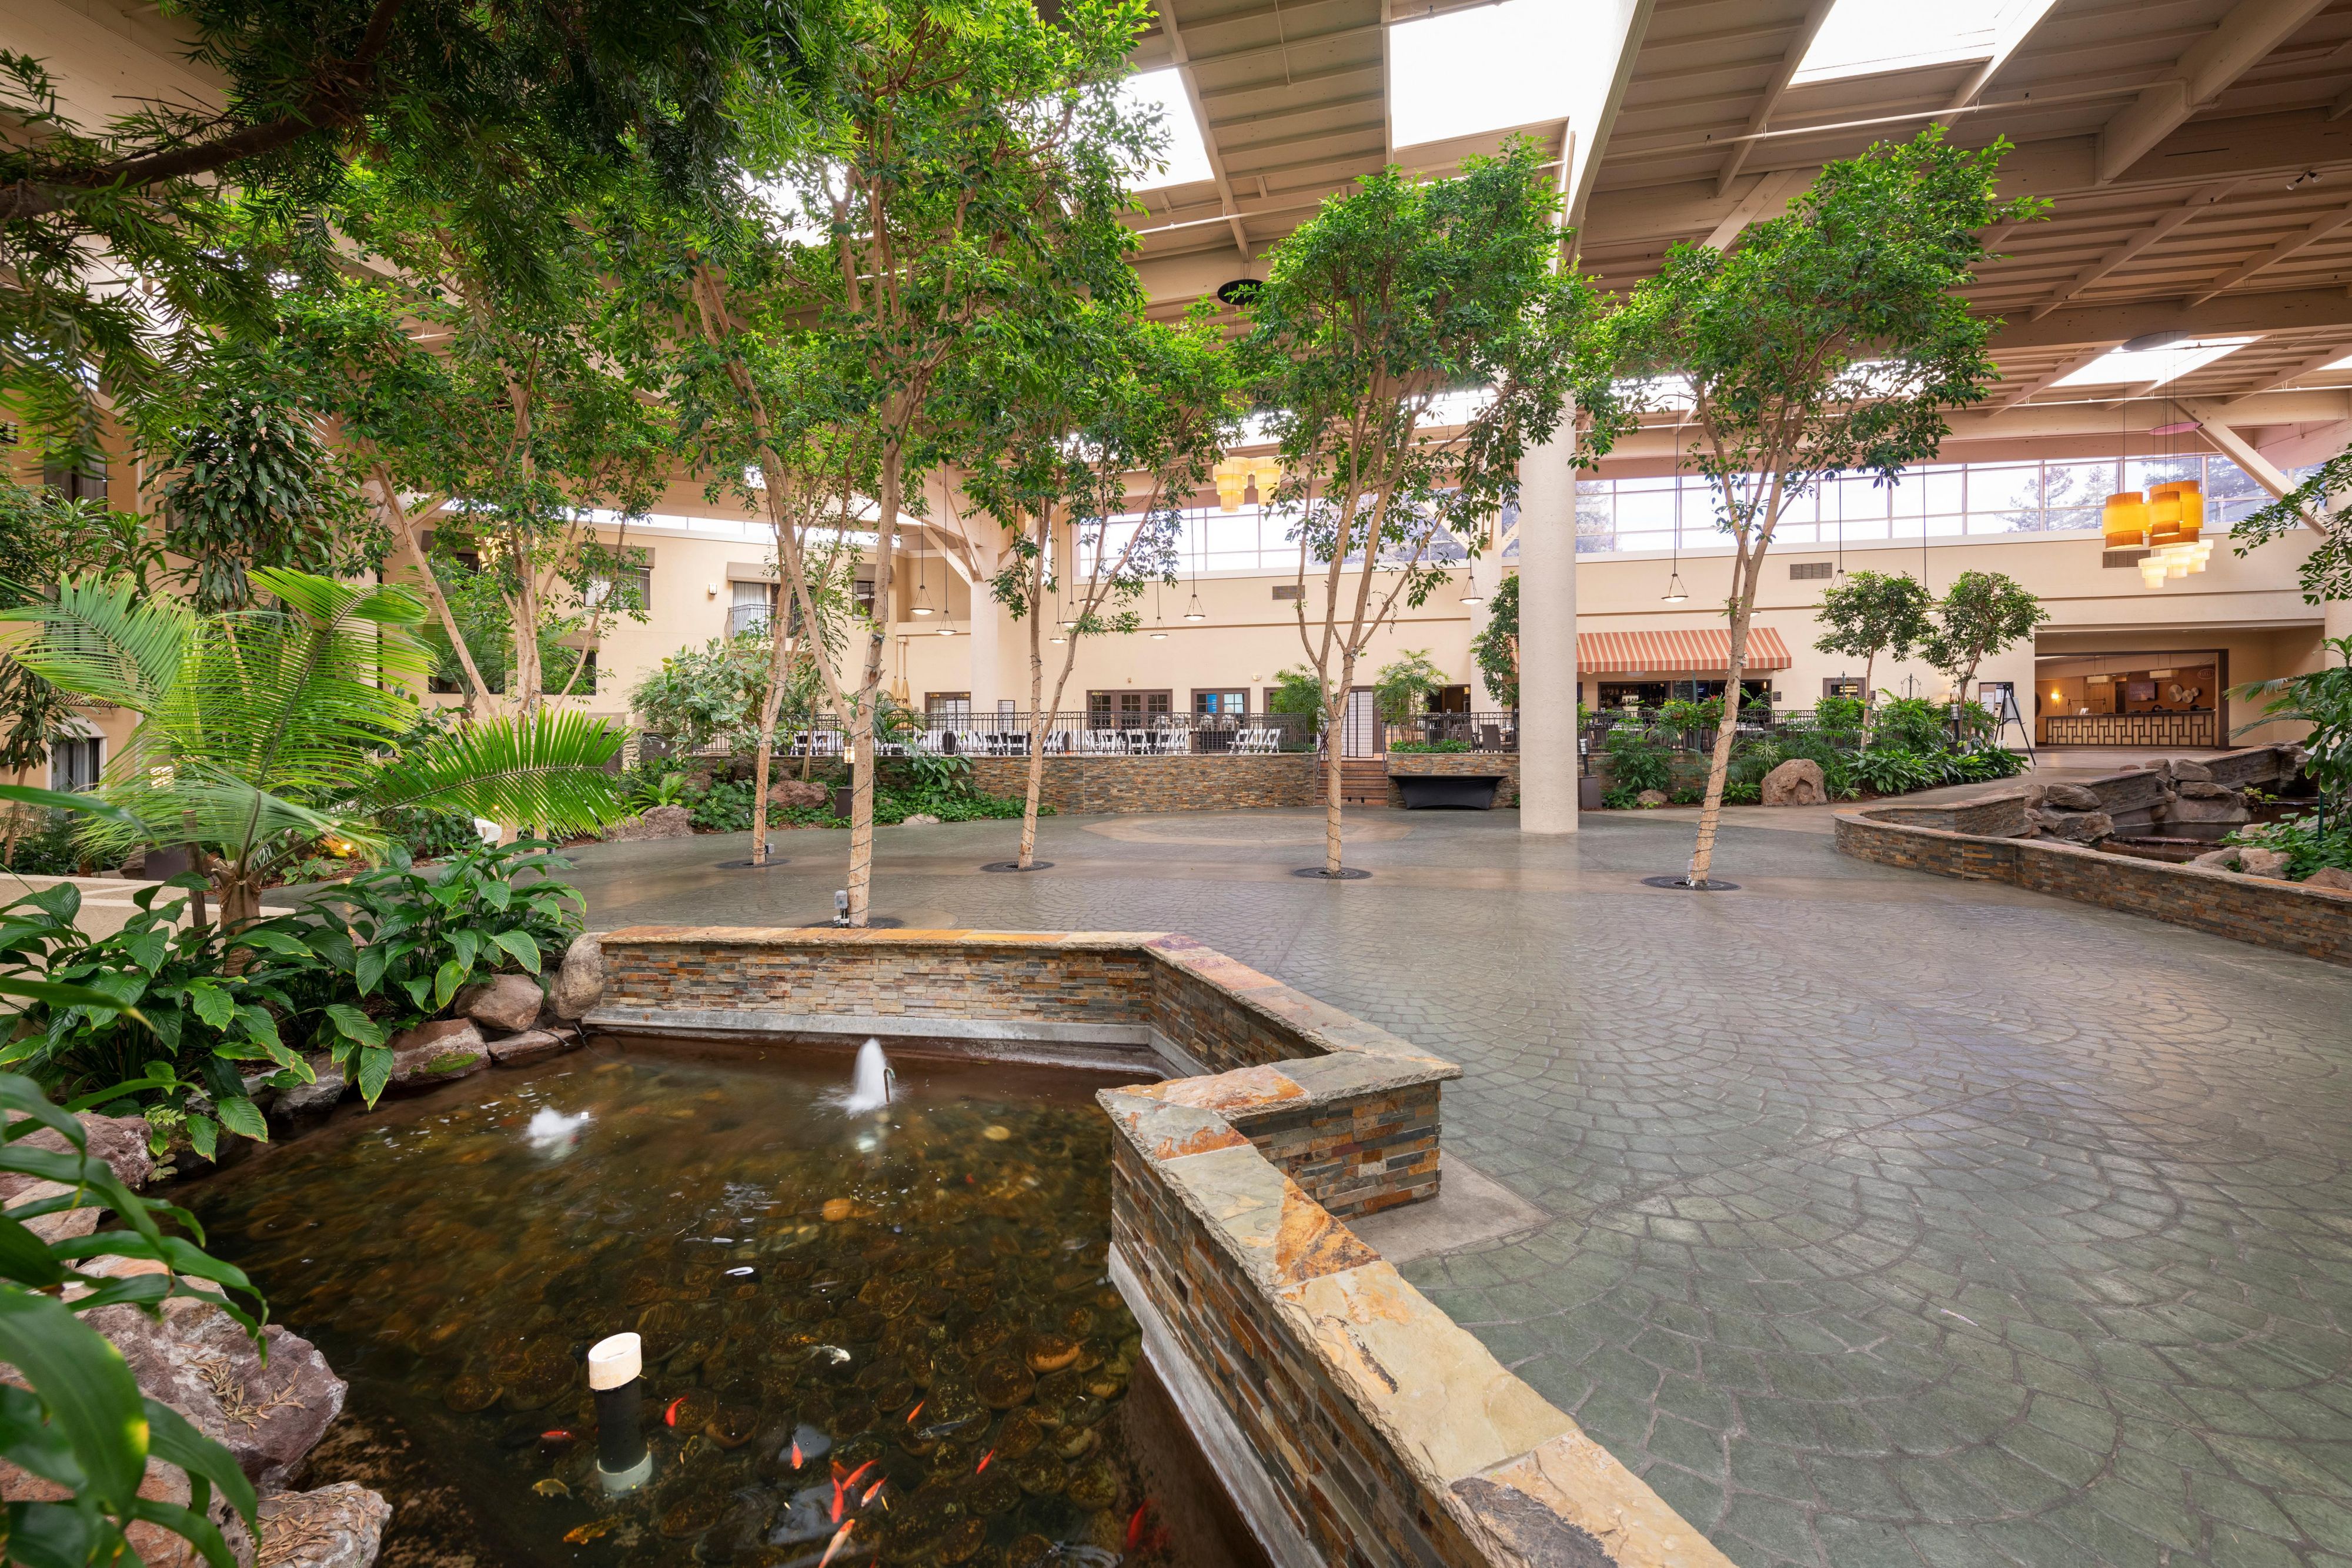 The Atrium features lush greenery space and Koi ponds